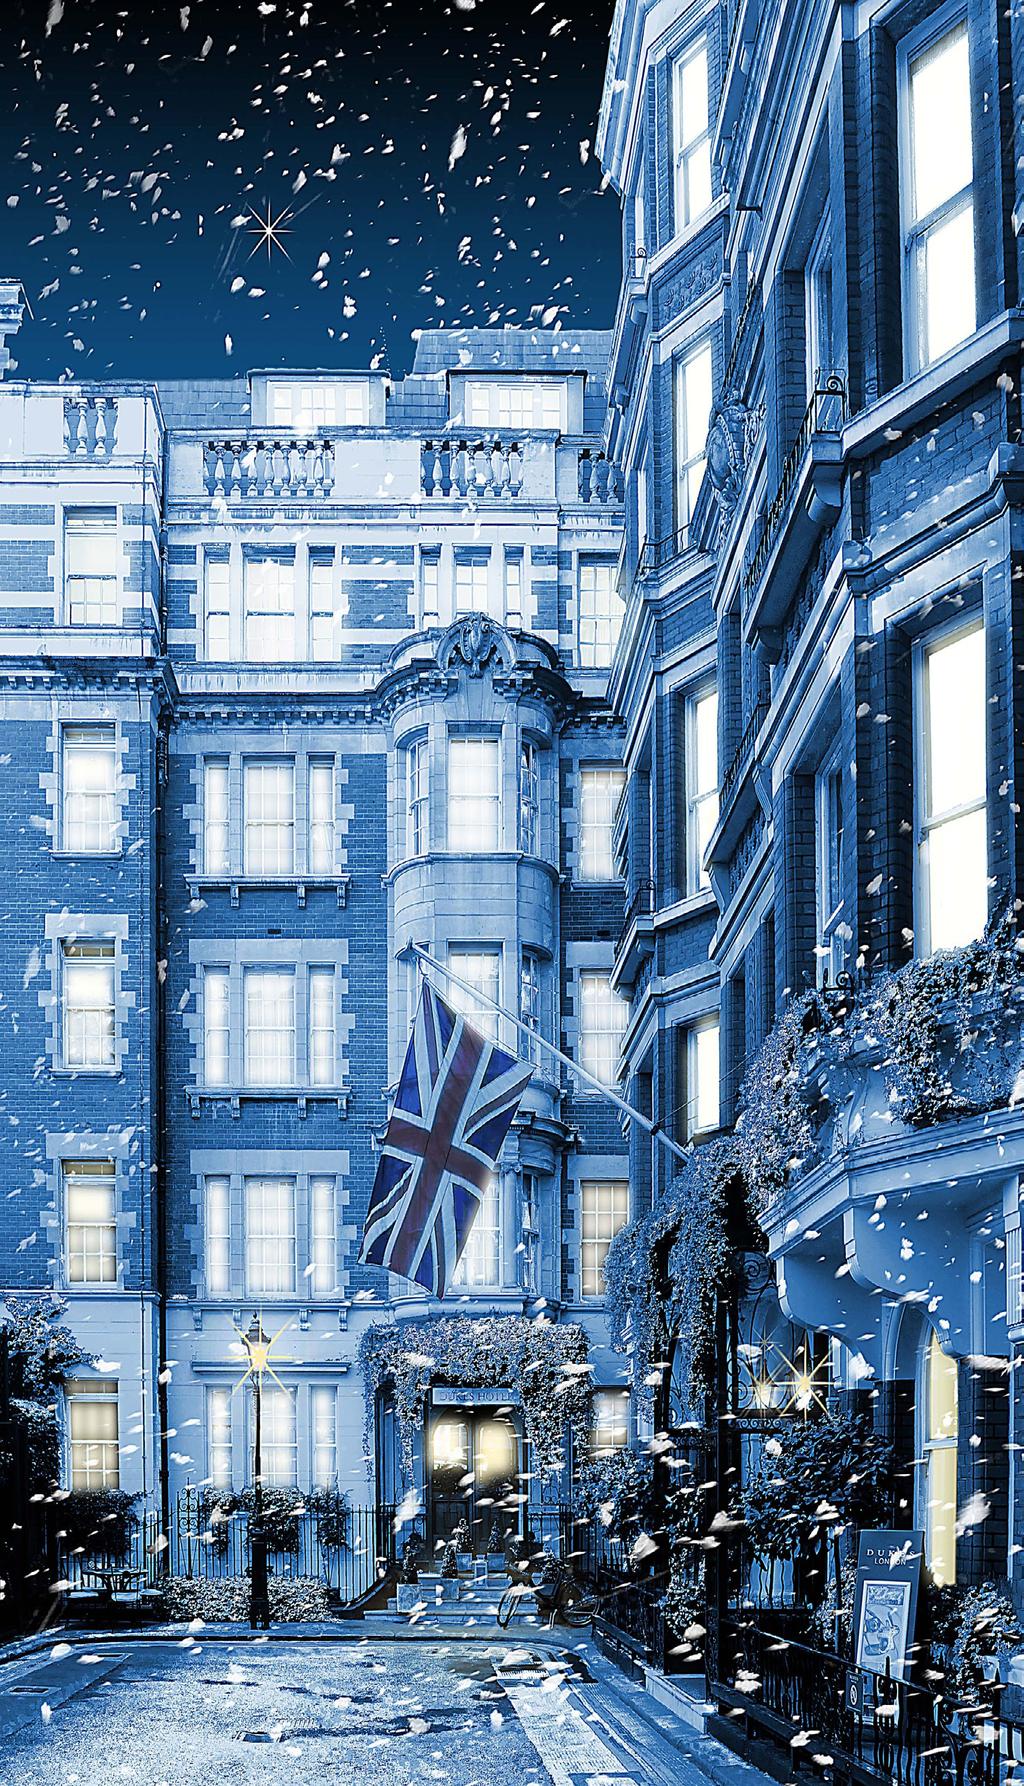 CONTACT THE EVENTS TEAM: + 44 (0)207 318 6575 EVENTS@DUKESHOTEL.